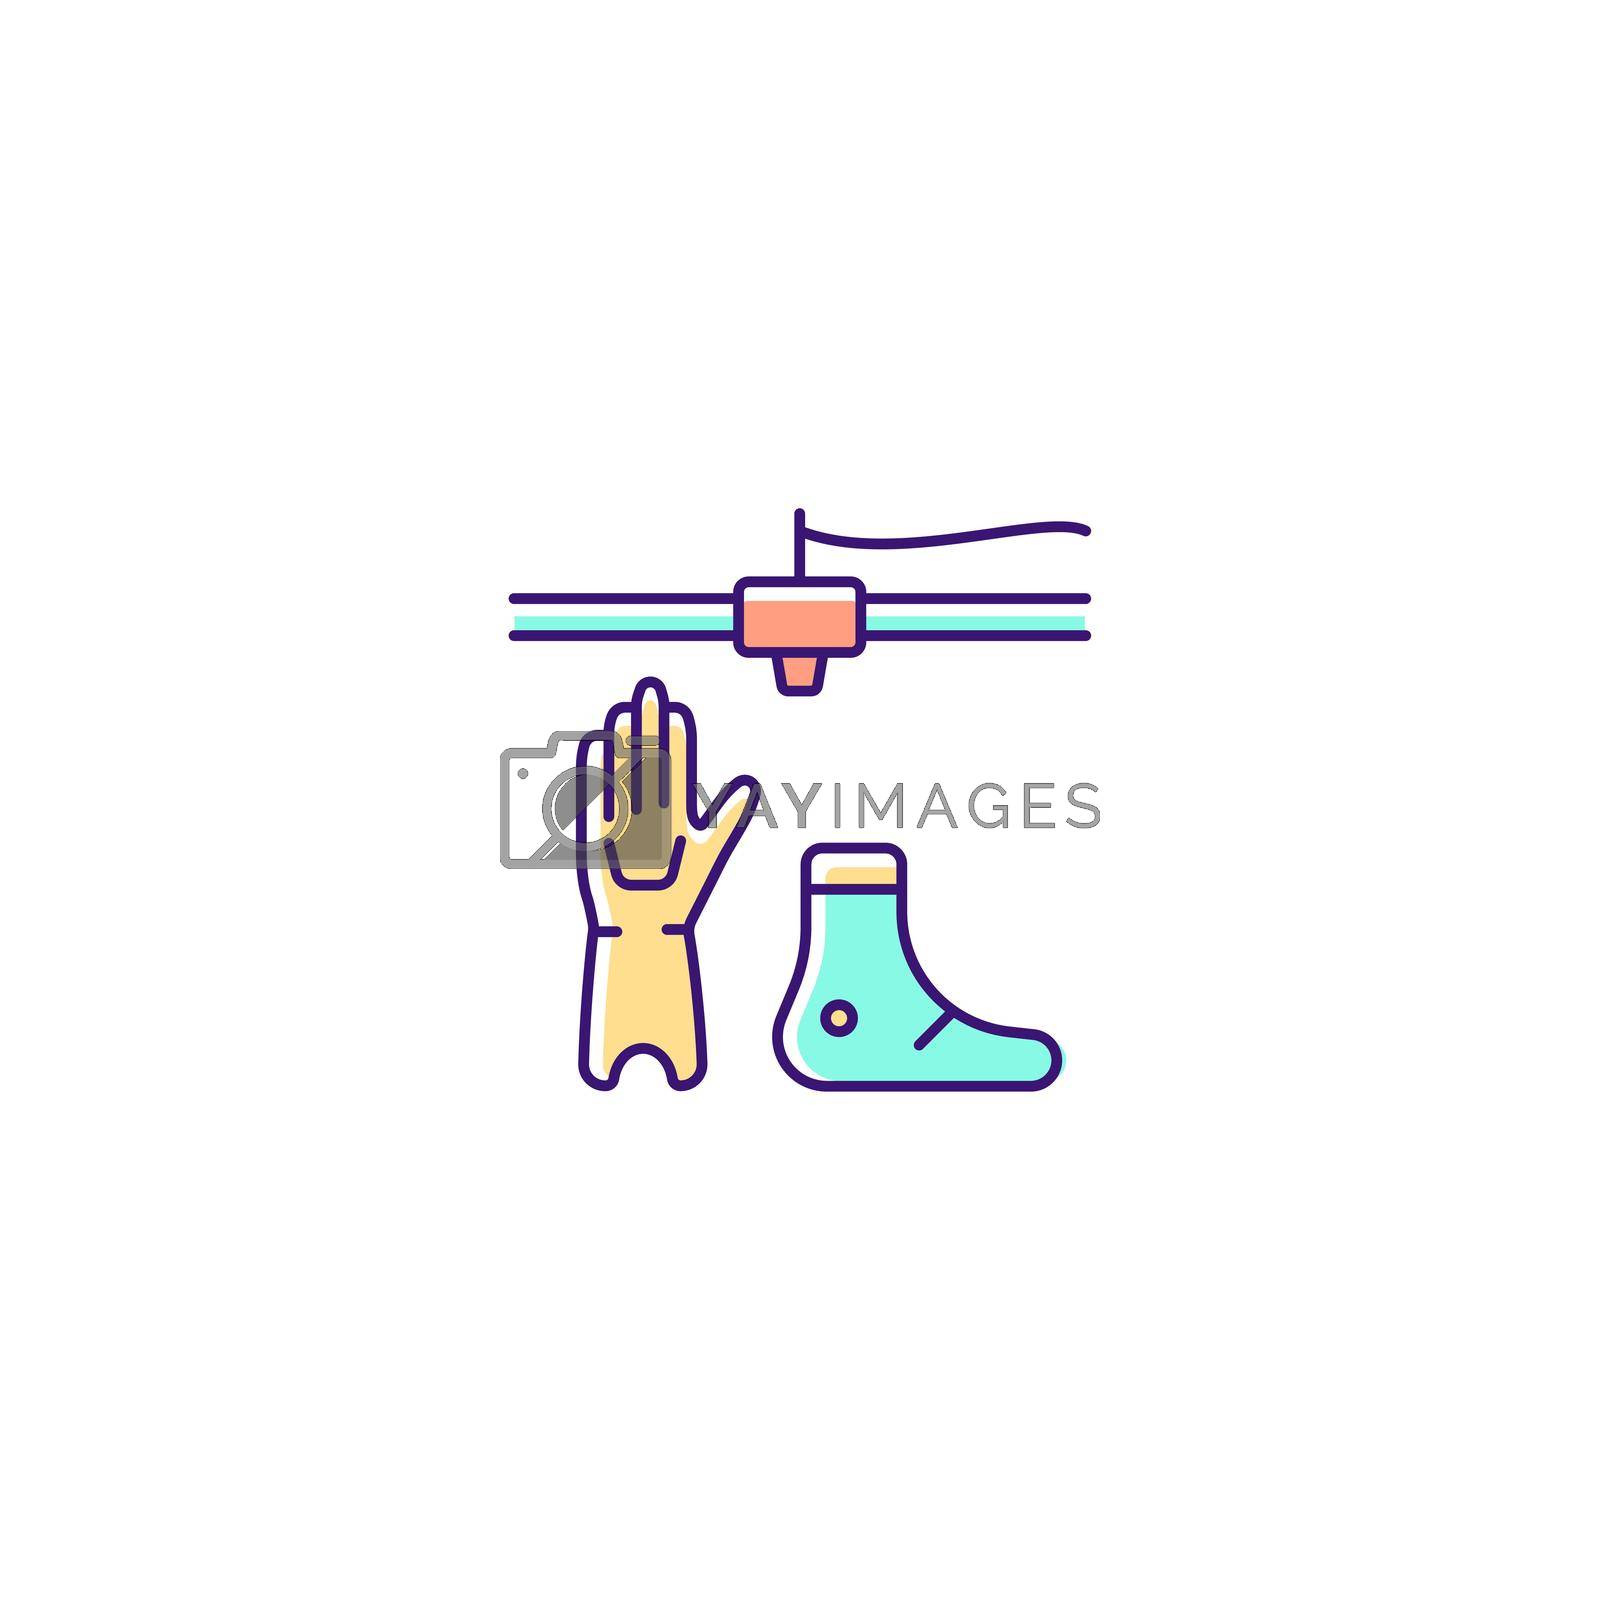 Royalty free image of 3d printed prosthetics RGB color icon by bsd